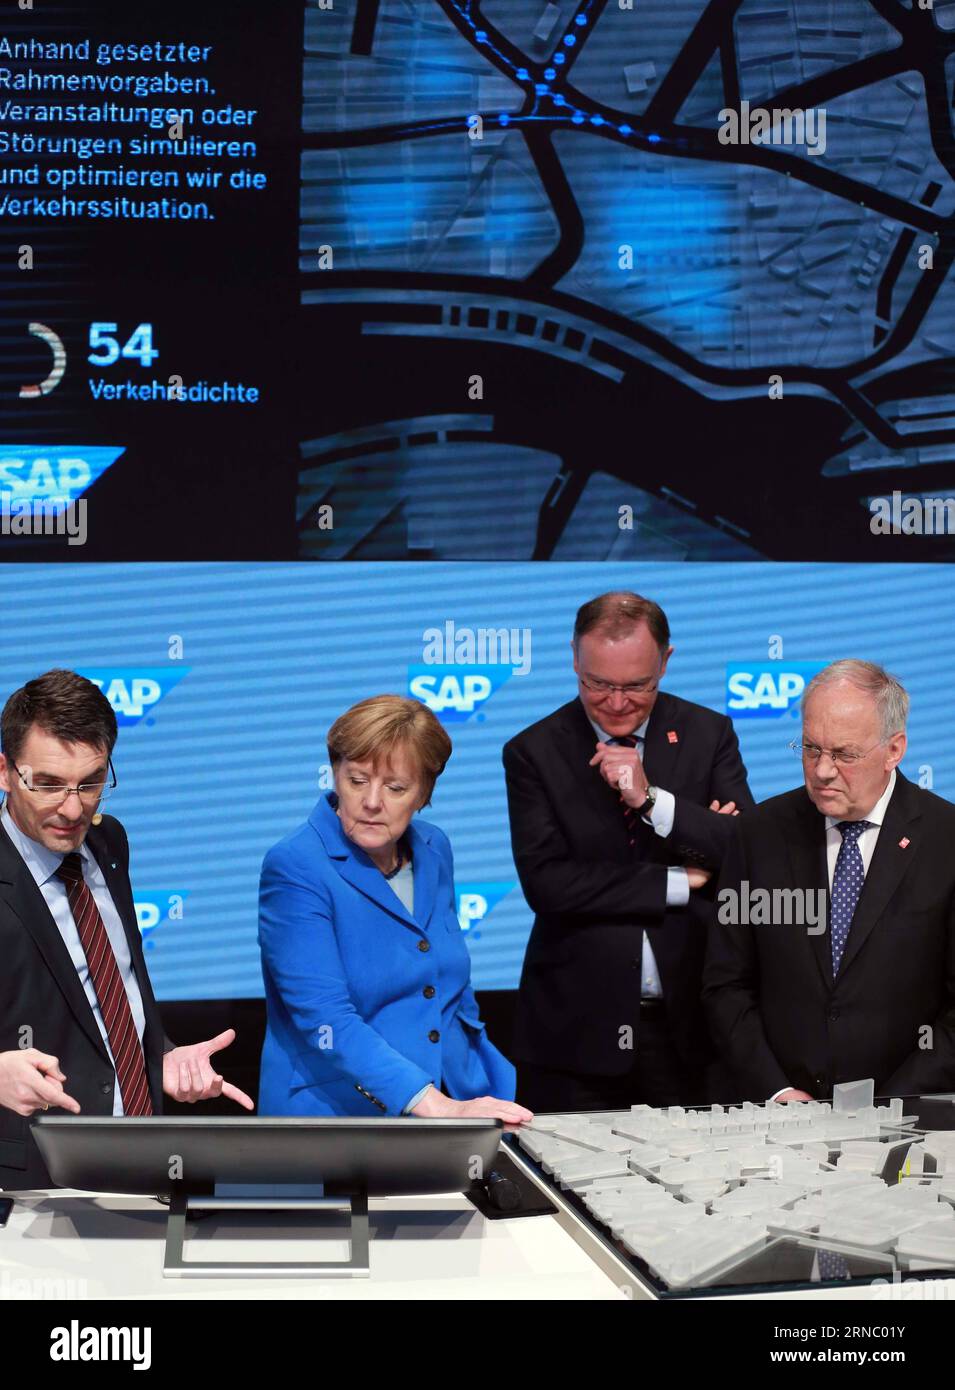 (160315) -- HANOVER, March 15, 2016 -- German chancellor Angela Merkel (2nd L) and Swiss President Johann Schneider-Ammann (1st R) visit the SAP booth during their visit to the CeBIT 2016 in Hanover, central Germany, on March 15, 2016. Switzerland is the partner country of the CeBIT 2016. ) GERMANY-HANOVER-CEBIT-SWITZERLAND LuoxHuanhuan PUBLICATIONxNOTxINxCHN   Hanover March 15 2016 German Chancellor Angela Merkel 2nd l and Swiss President Johann Schneider Ammann 1st r Visit The SAP Booth during their Visit to The CeBit 2016 in Hanover Central Germany ON March 15 2016 Switzerland IS The Partne Stock Photo